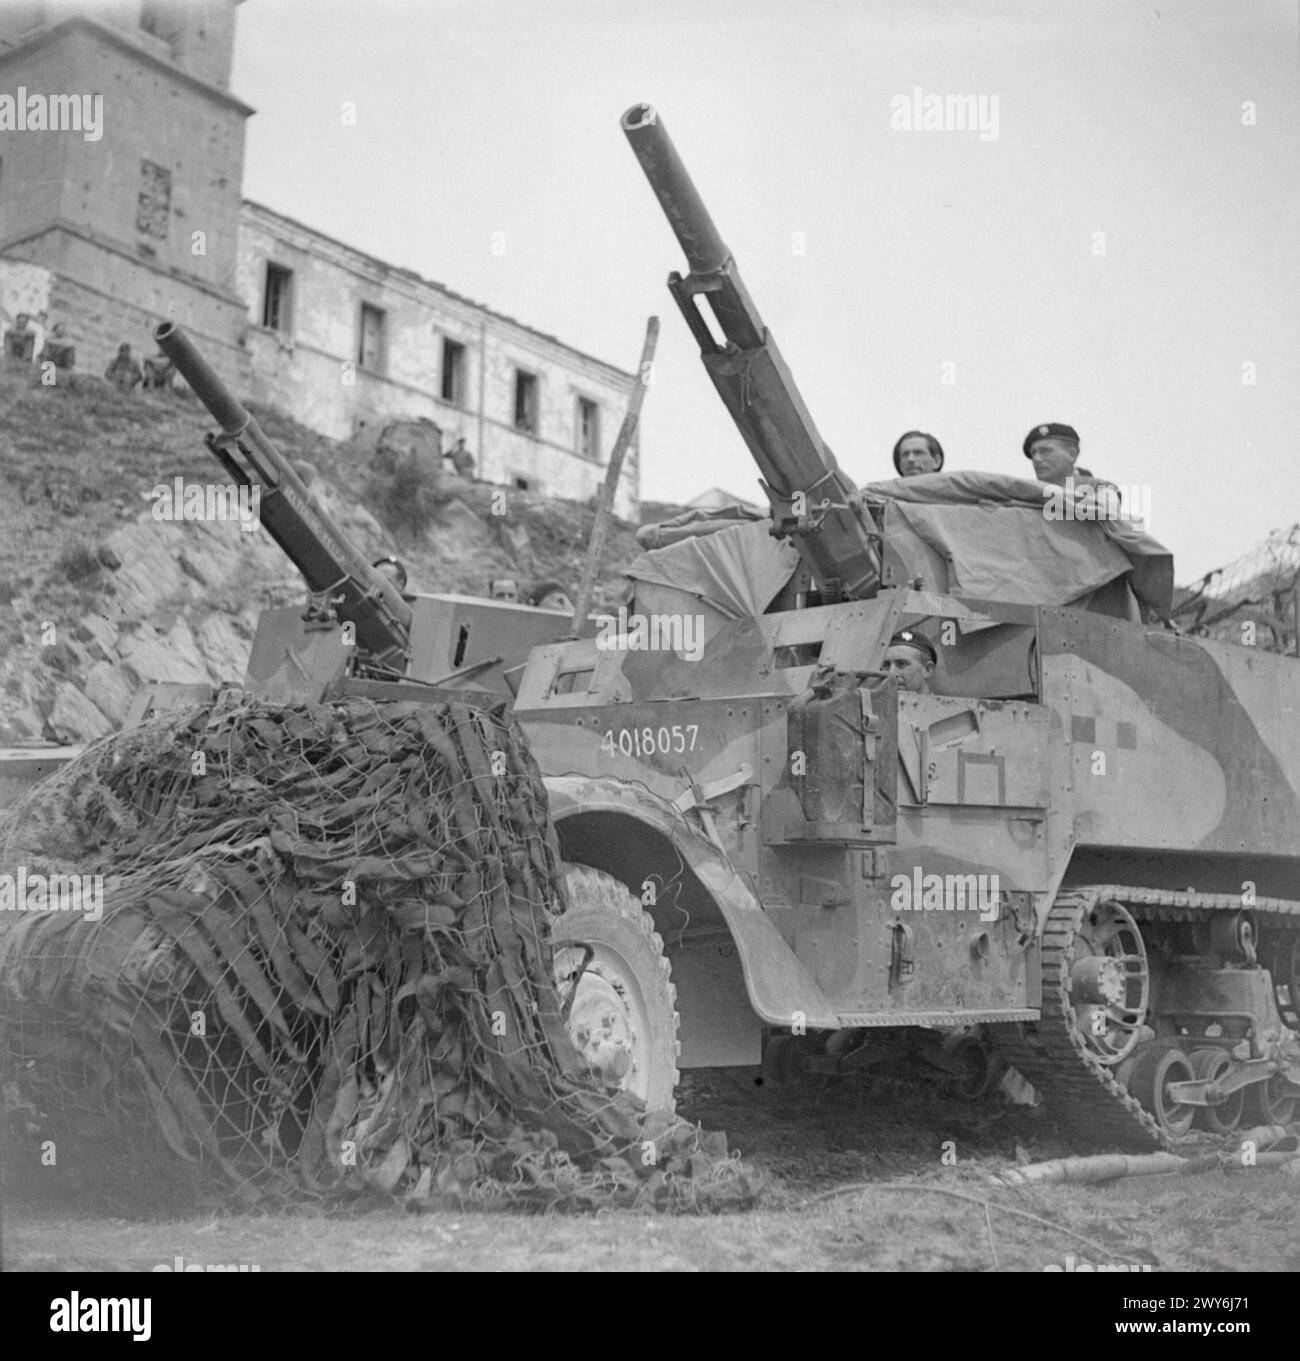 THE BRITISH ARMY IN ITALY 1944 - Two M3 half-tracks mounting 75mm guns of the King's Dragoon Guards, 7 May 1944. , Stock Photo